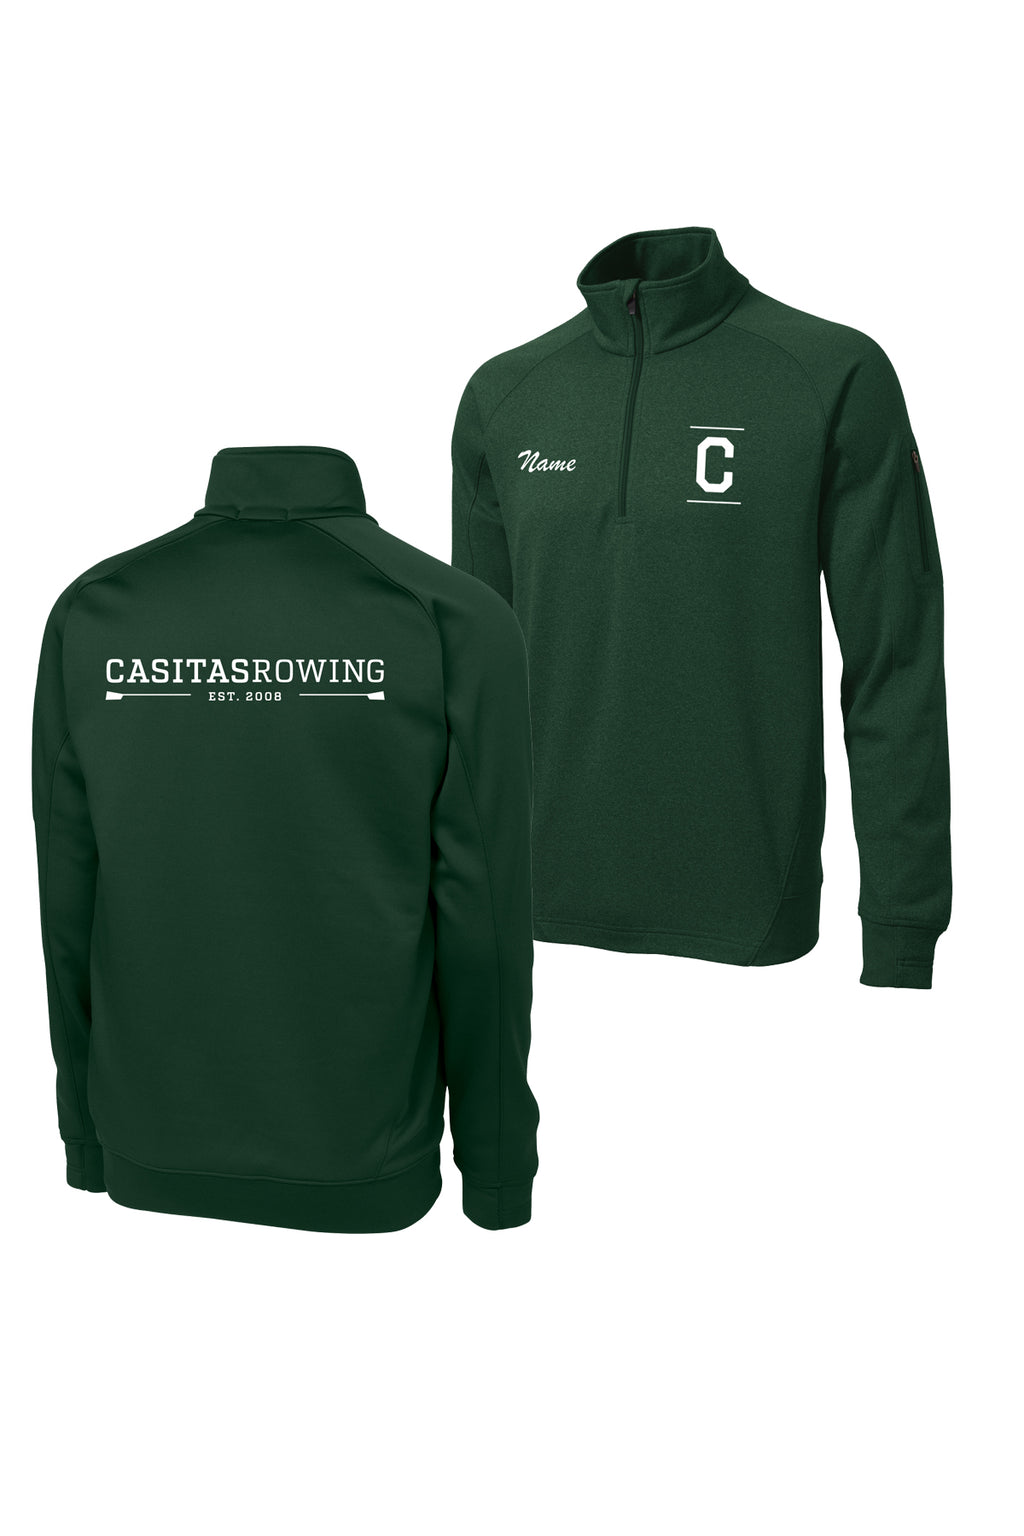 Casitas Rowing Mens Performance Pullover